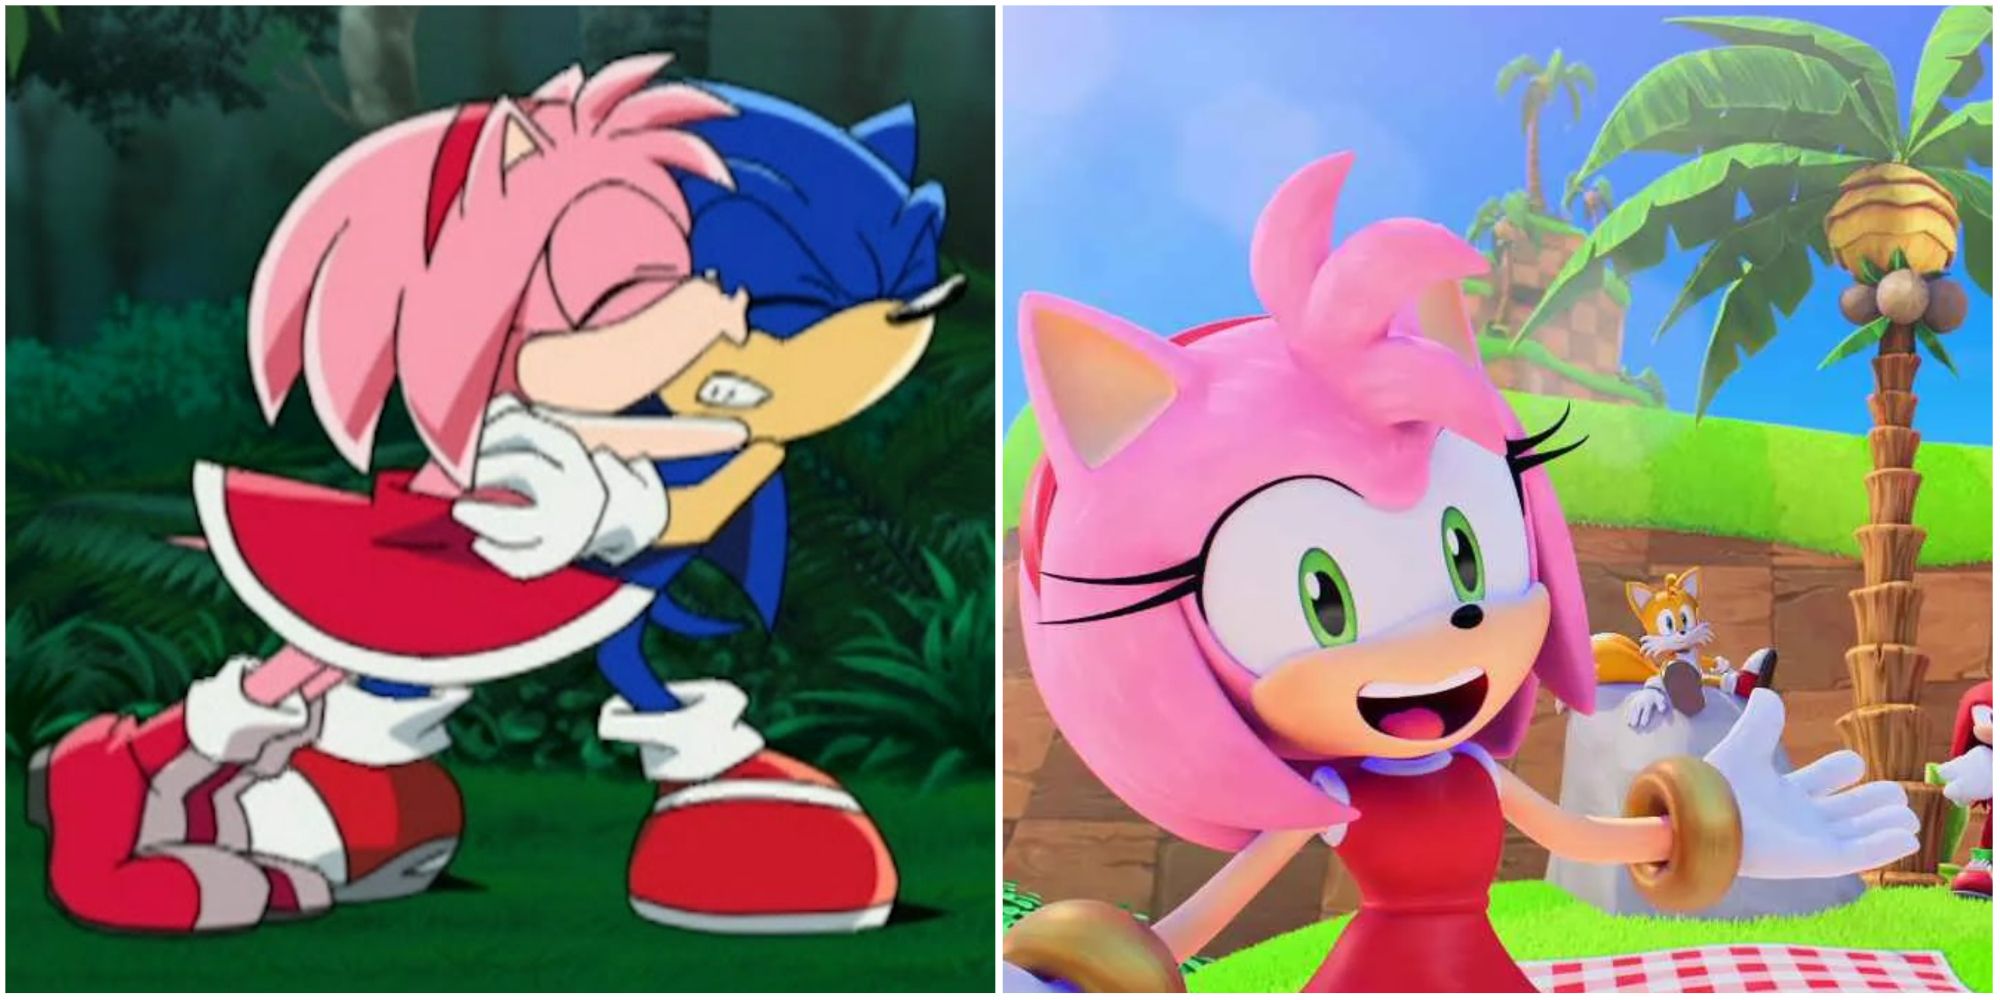 Amy in Sonic X and Sonic Prime